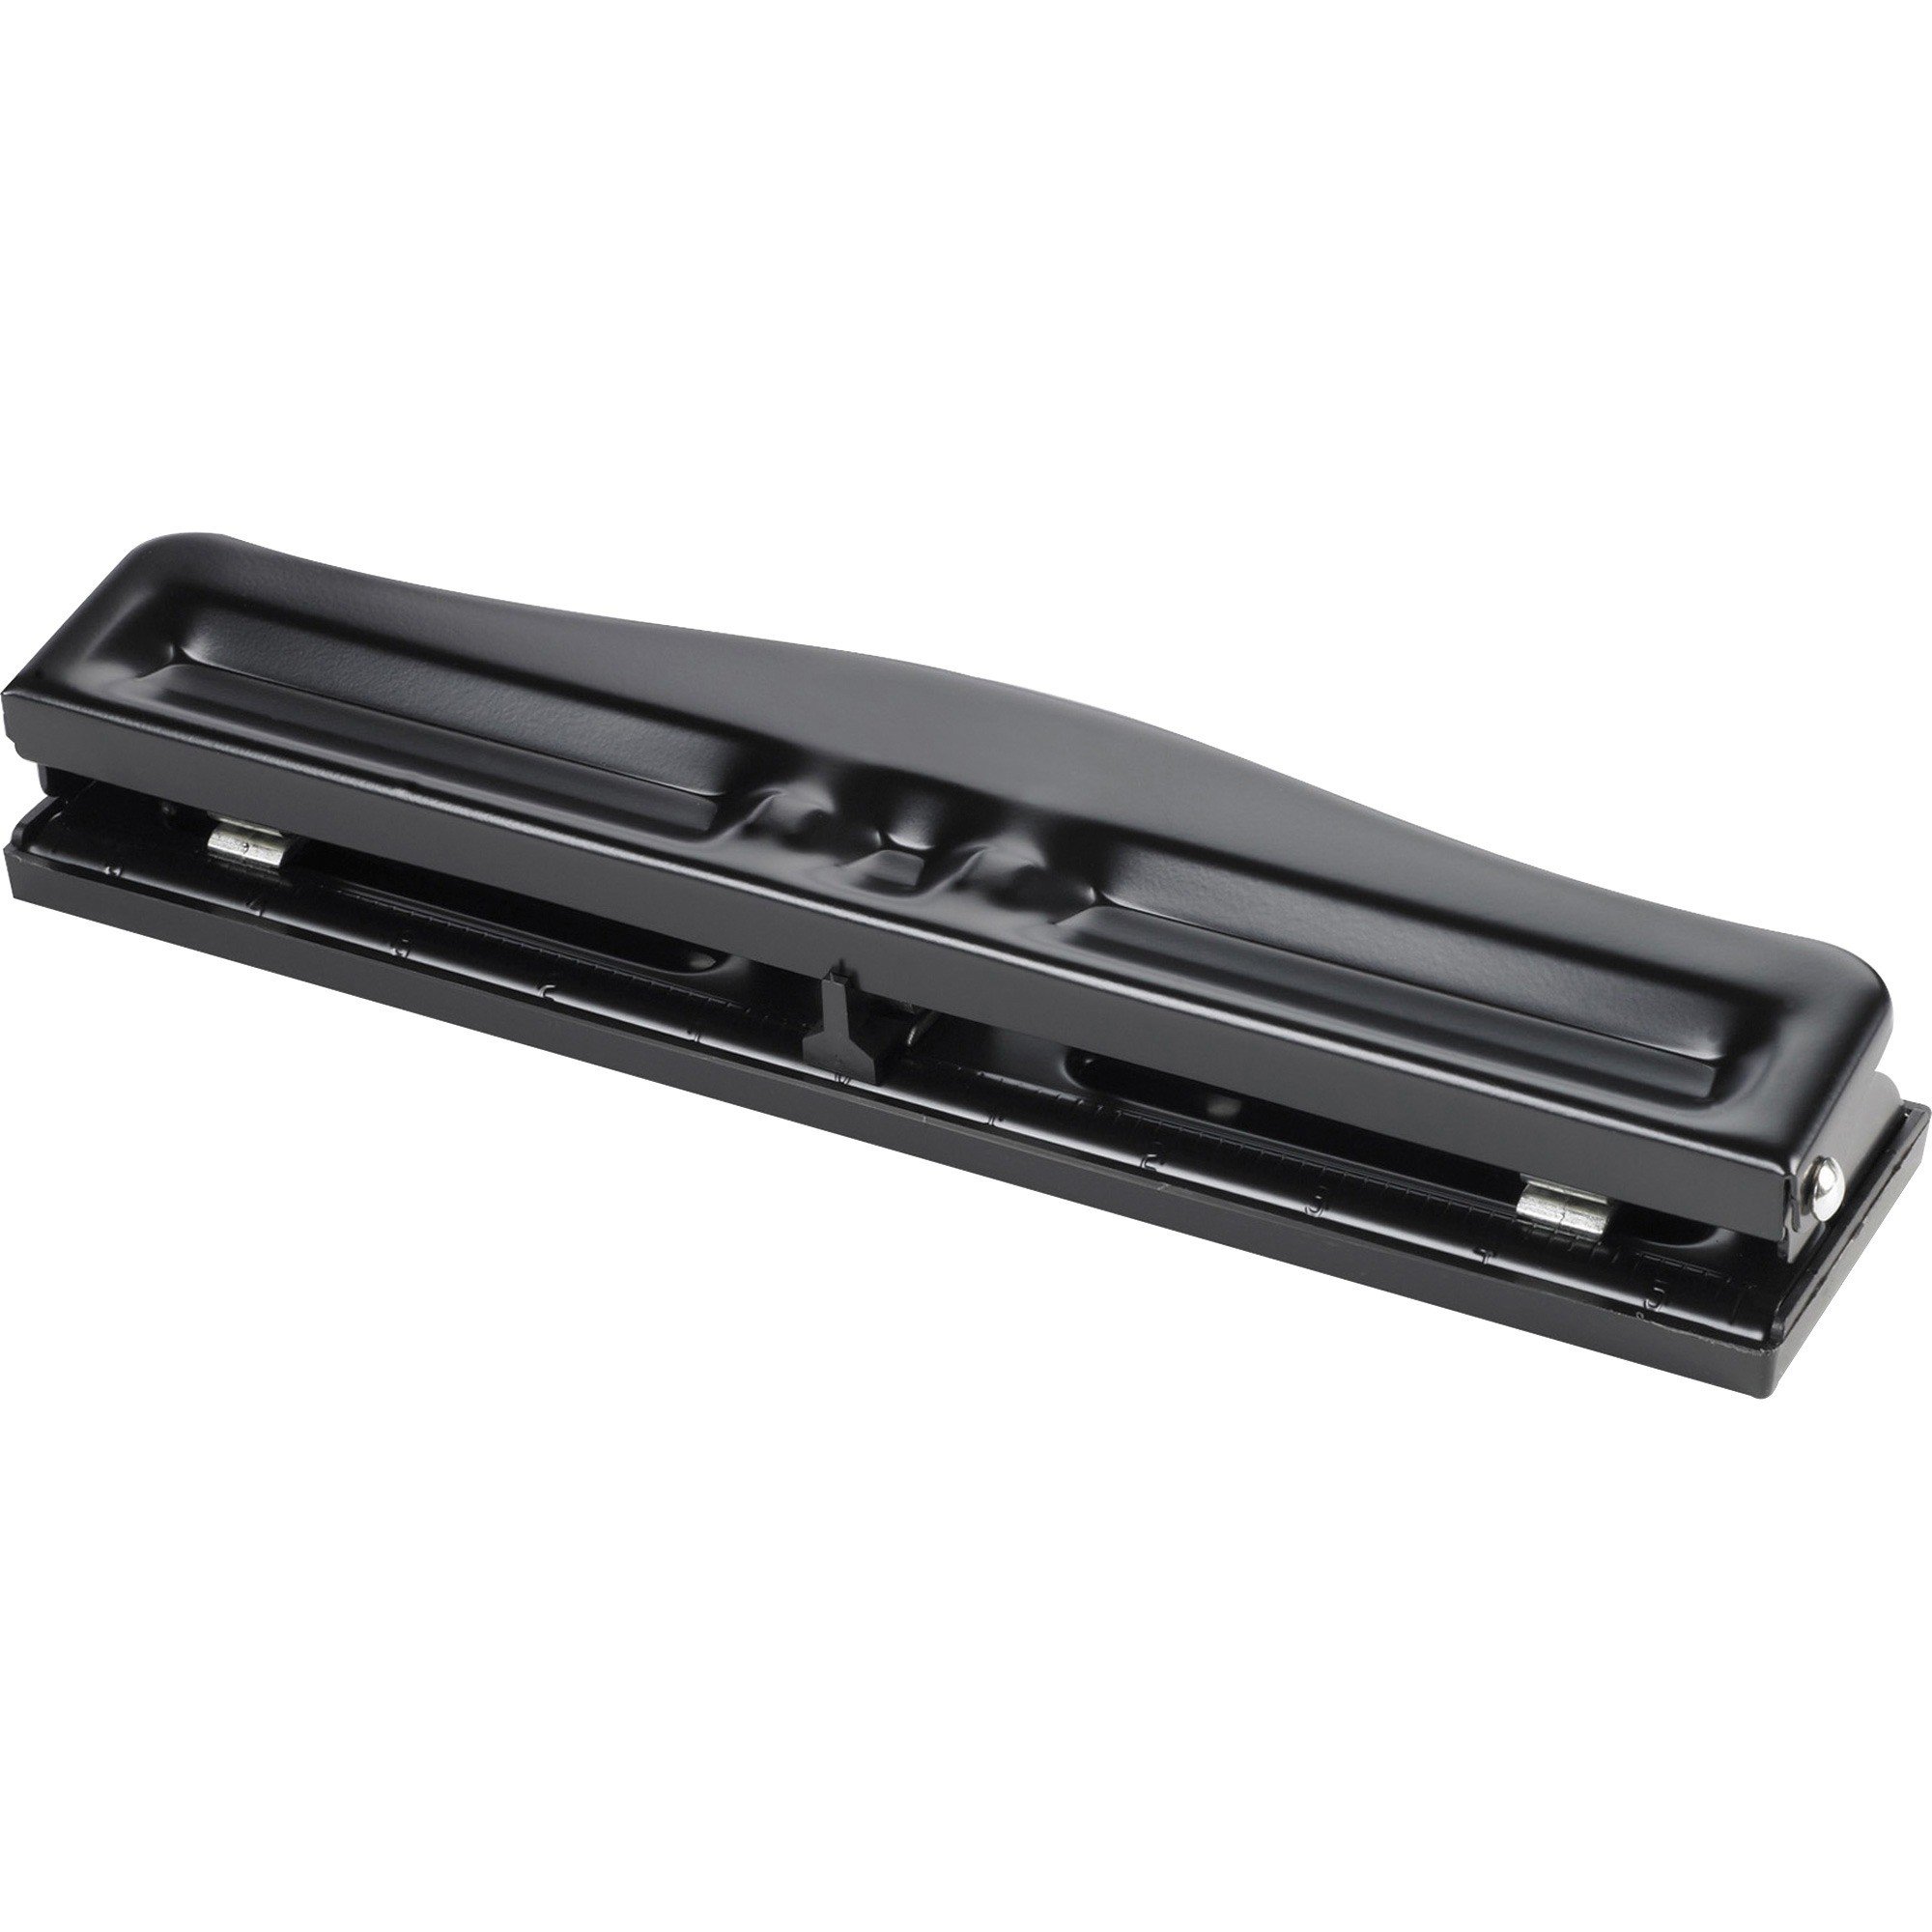 Business Source 3-Hole Adjustable Paper Punch